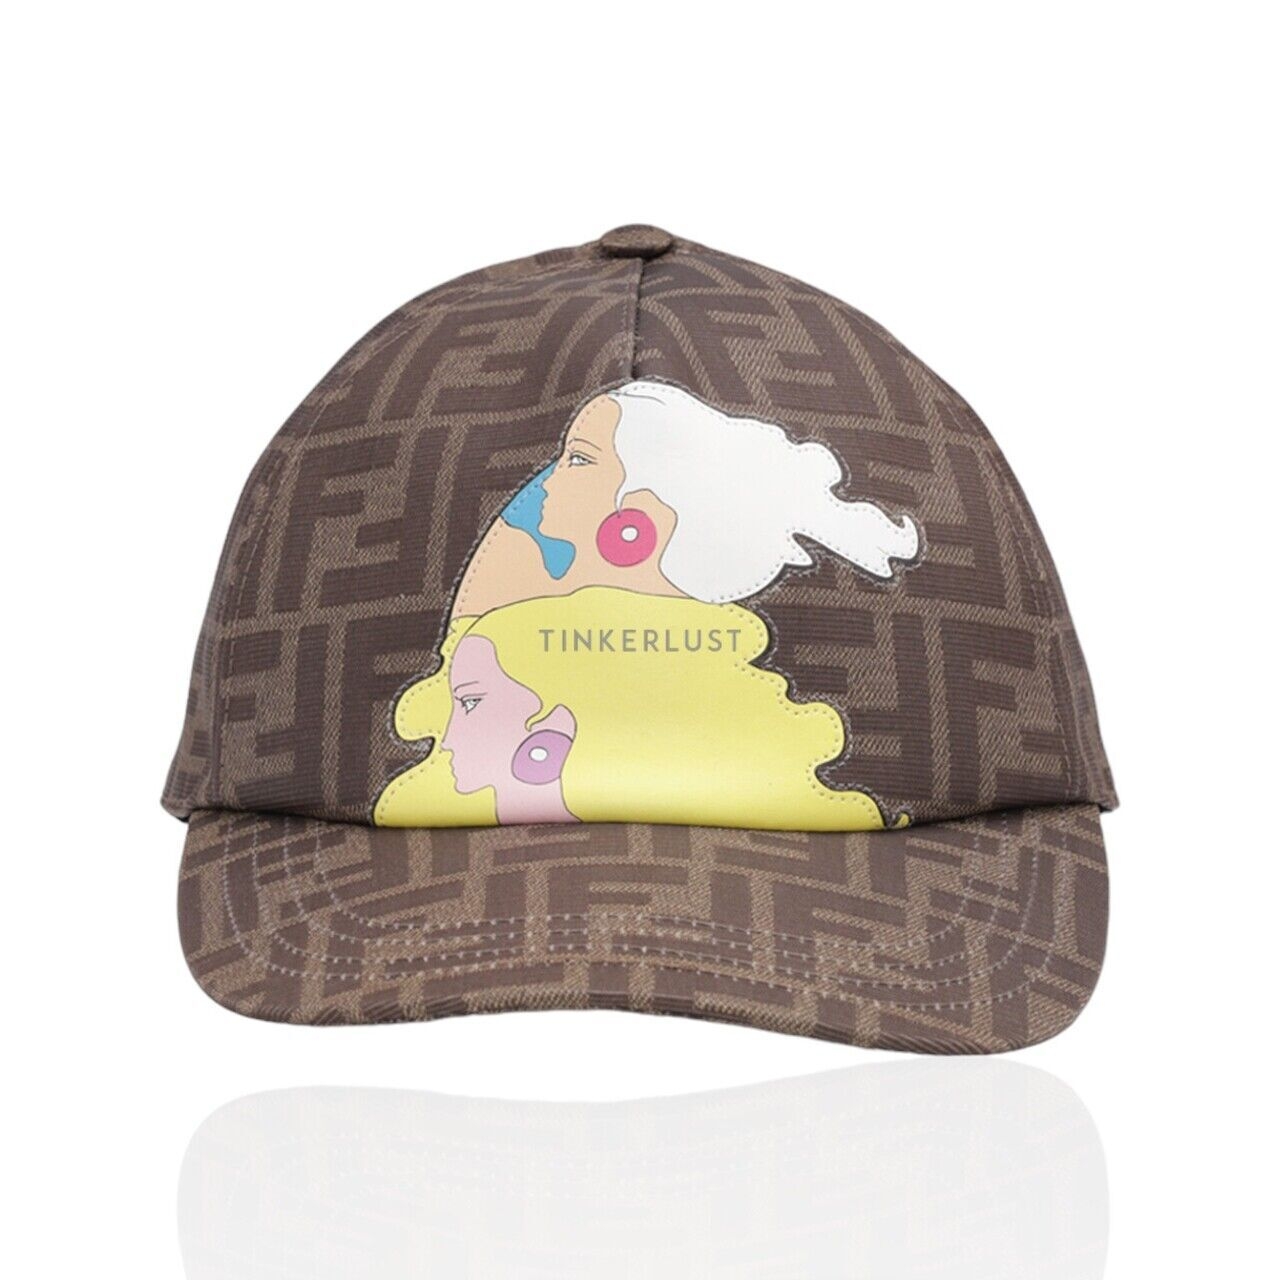 Fendi All Over FF Logo Baseball Cap in Brown/Tobacco with The Hairdo Girls Graphics